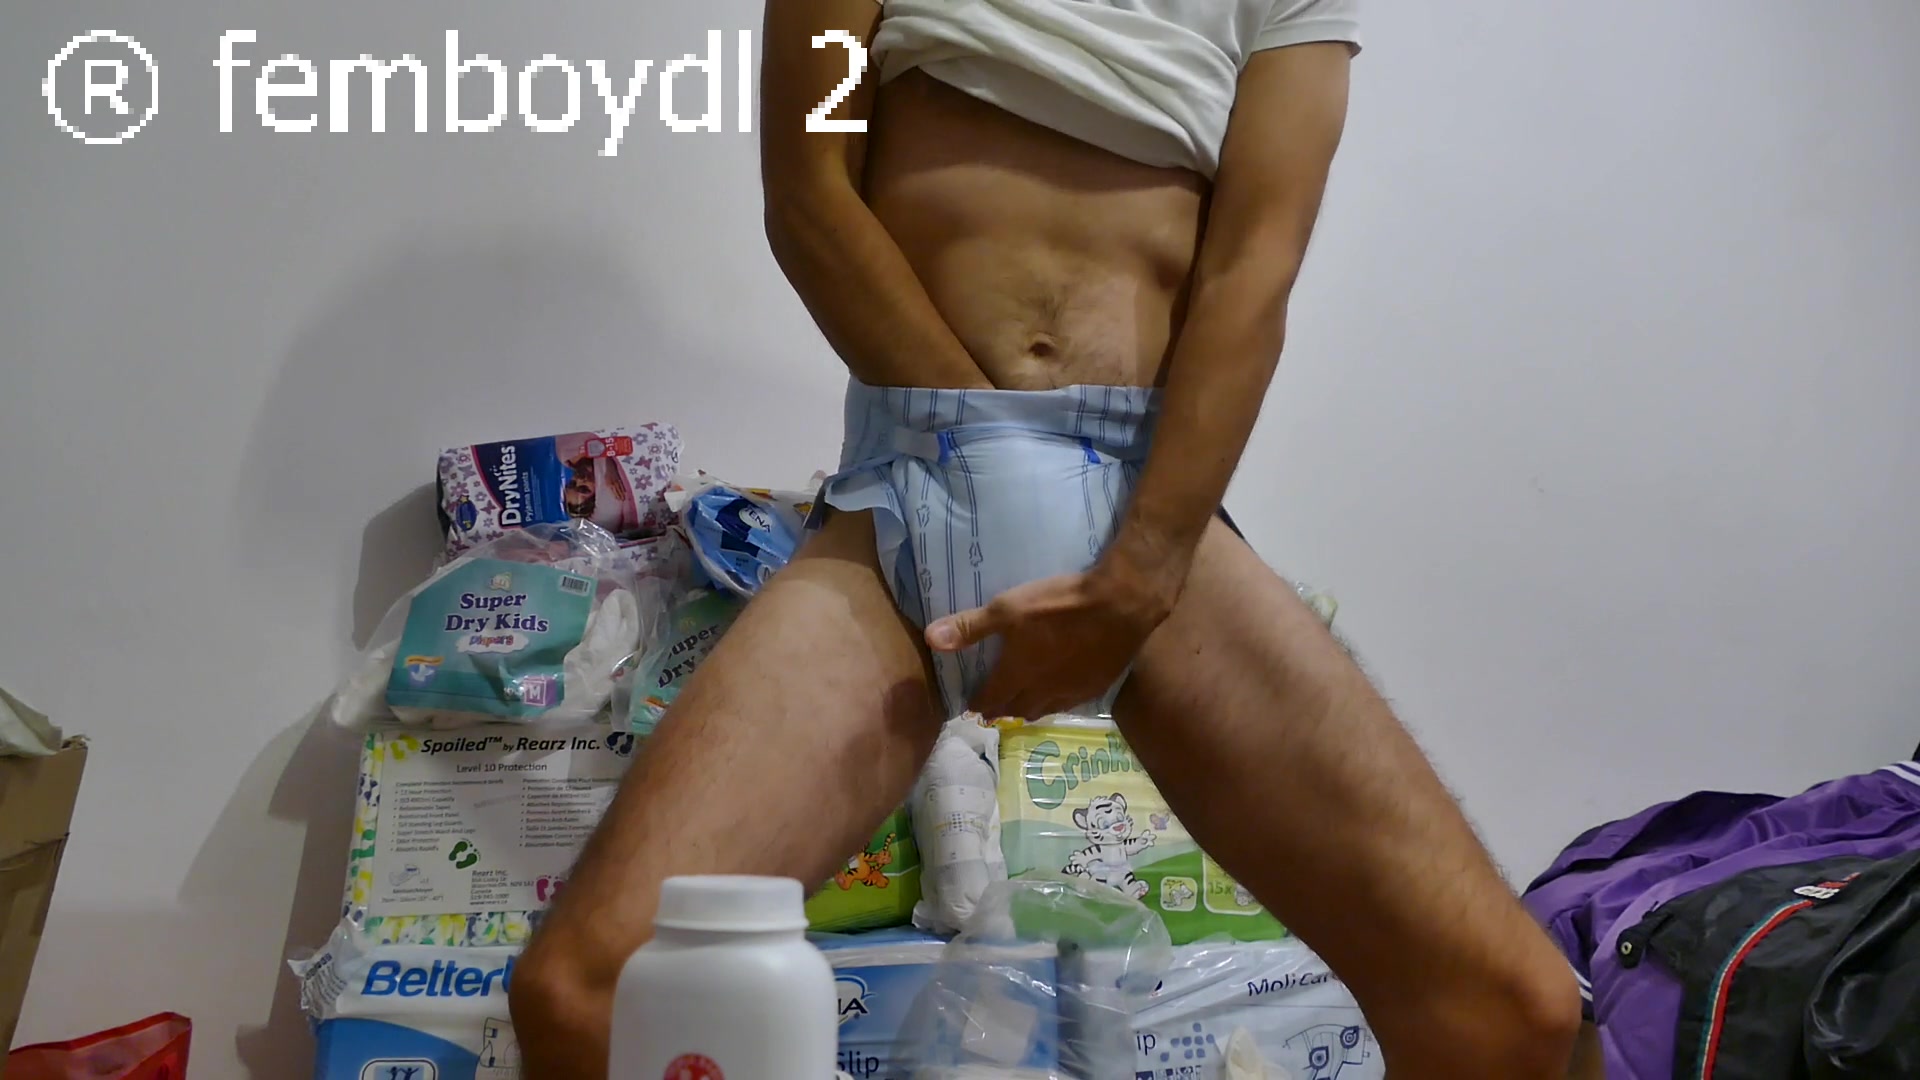 long video - enjoying a diaper while shopping in tight ripped jeans